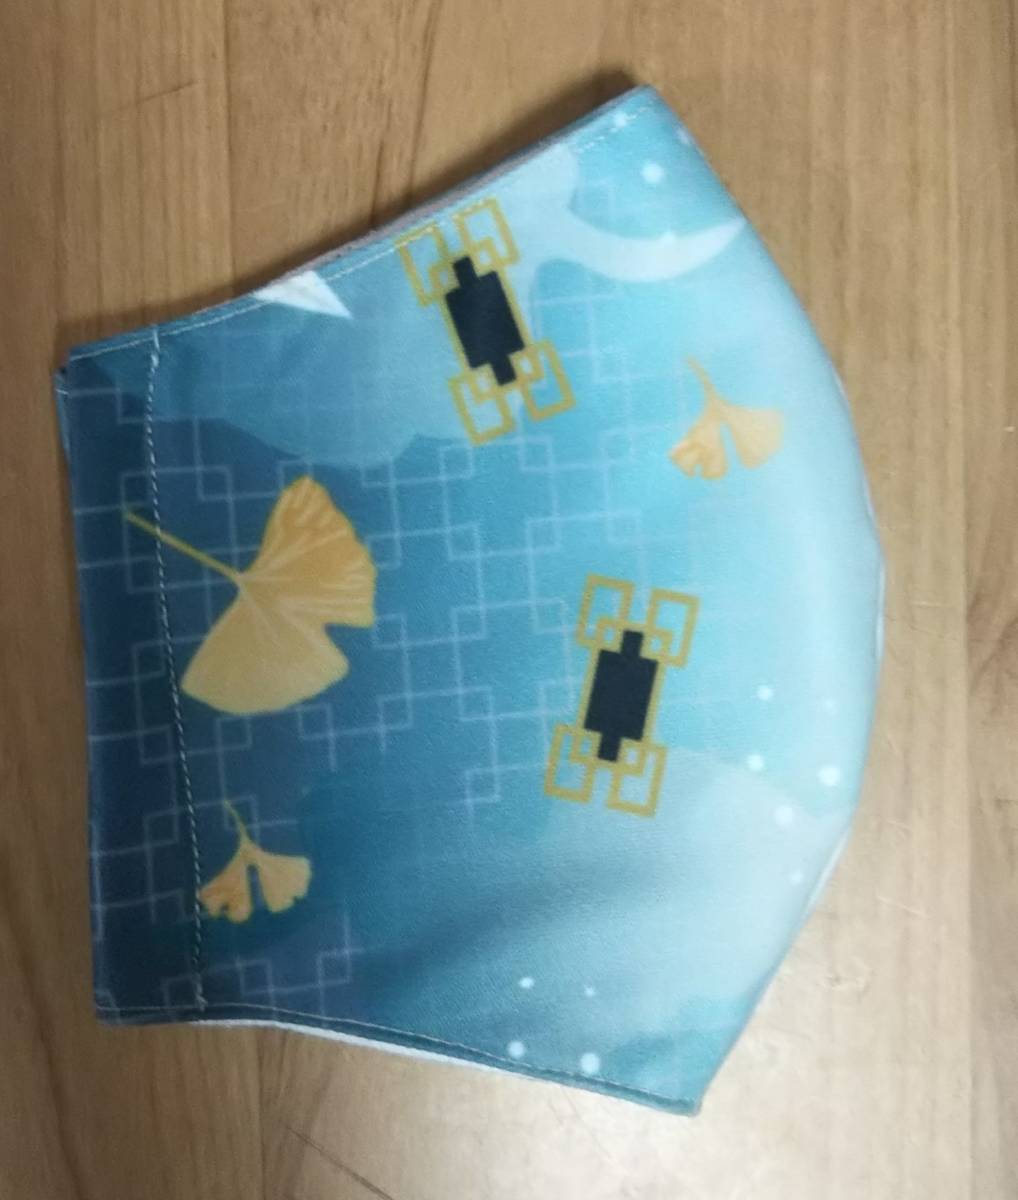  hour . less one .( Kids )# inner mask rubber attaching ... blade image pattern hour . have one . paper airplane ginkgo biloba 